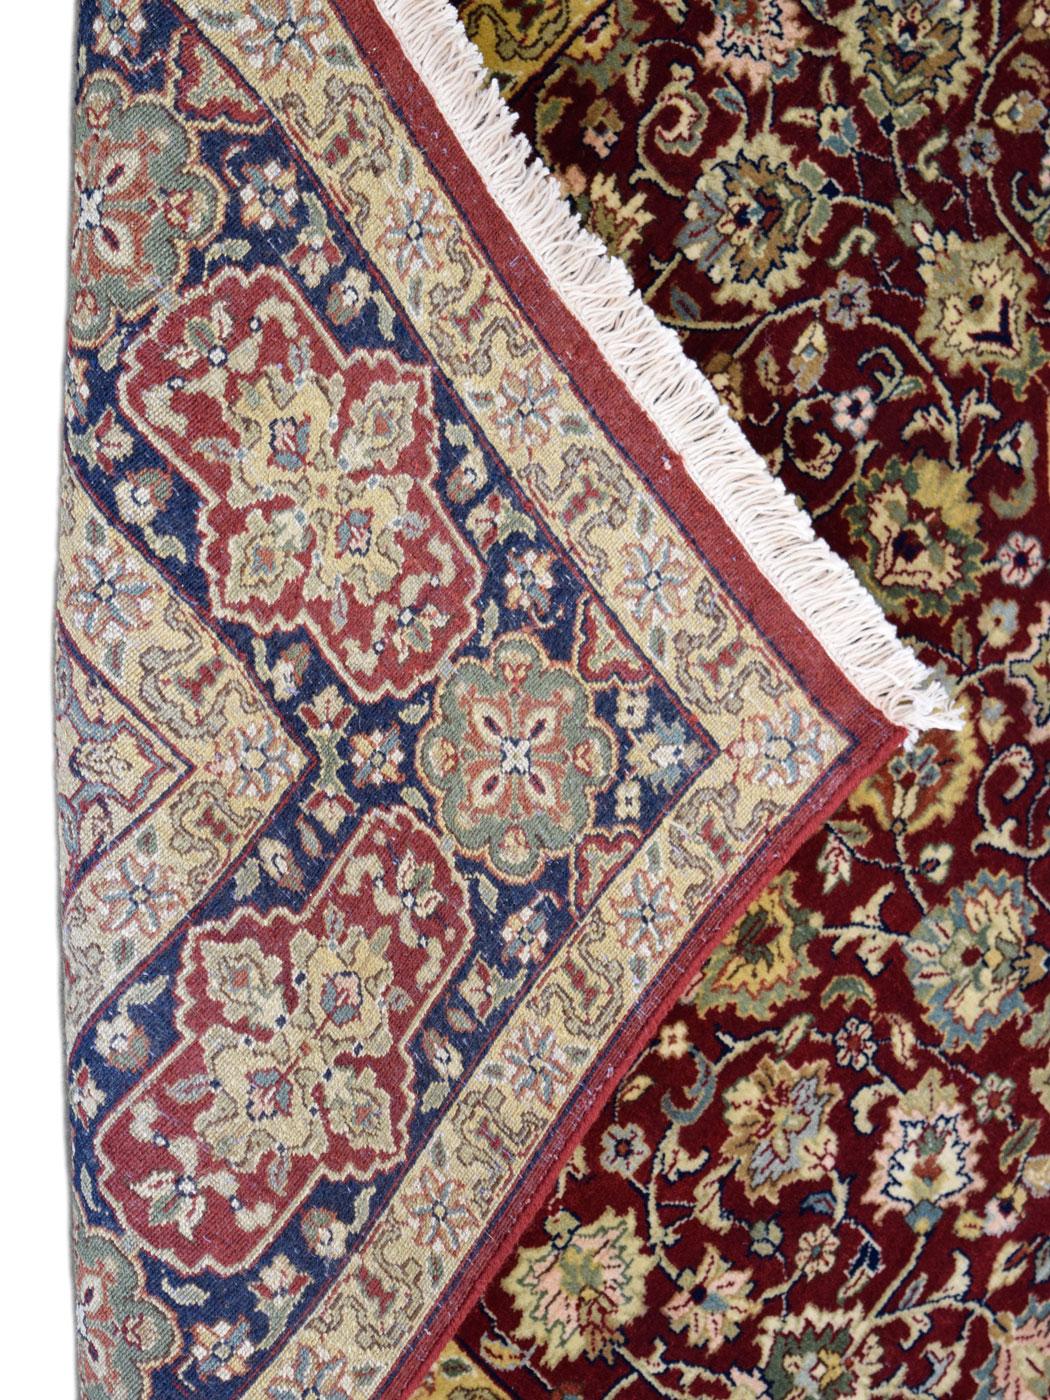 Fine Hand Knotted Tabriz Carpet in Gold Maroon and Cream Wool, 5' x 7' For Sale 6